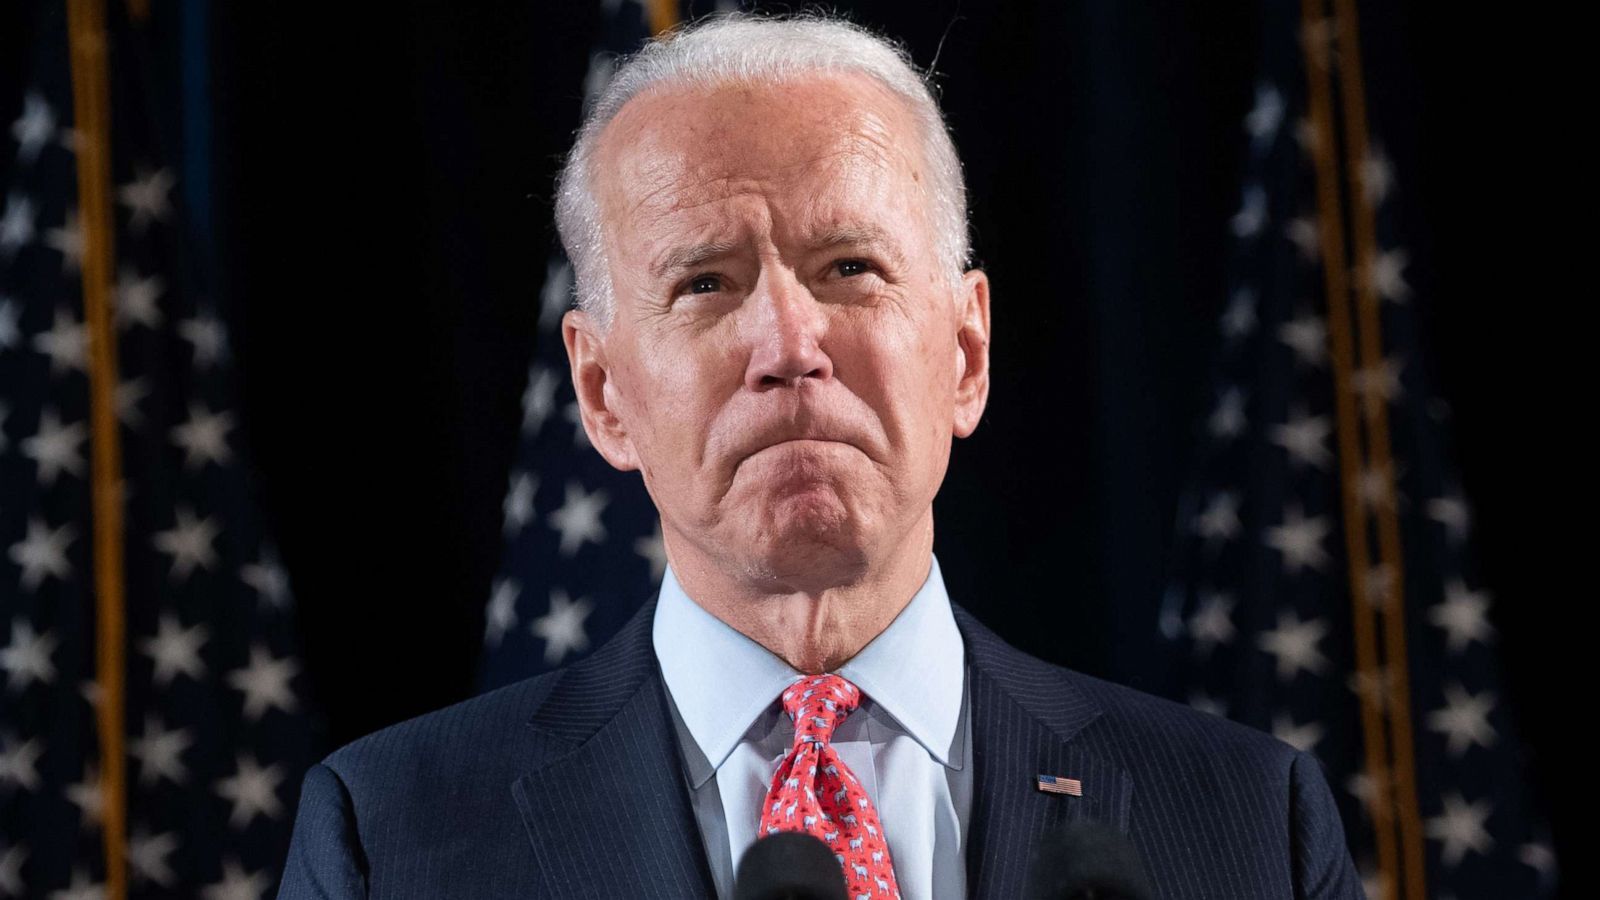 Joe Biden to scale up campaign as Democratic anxiety grows ahead of general election fight with Trump